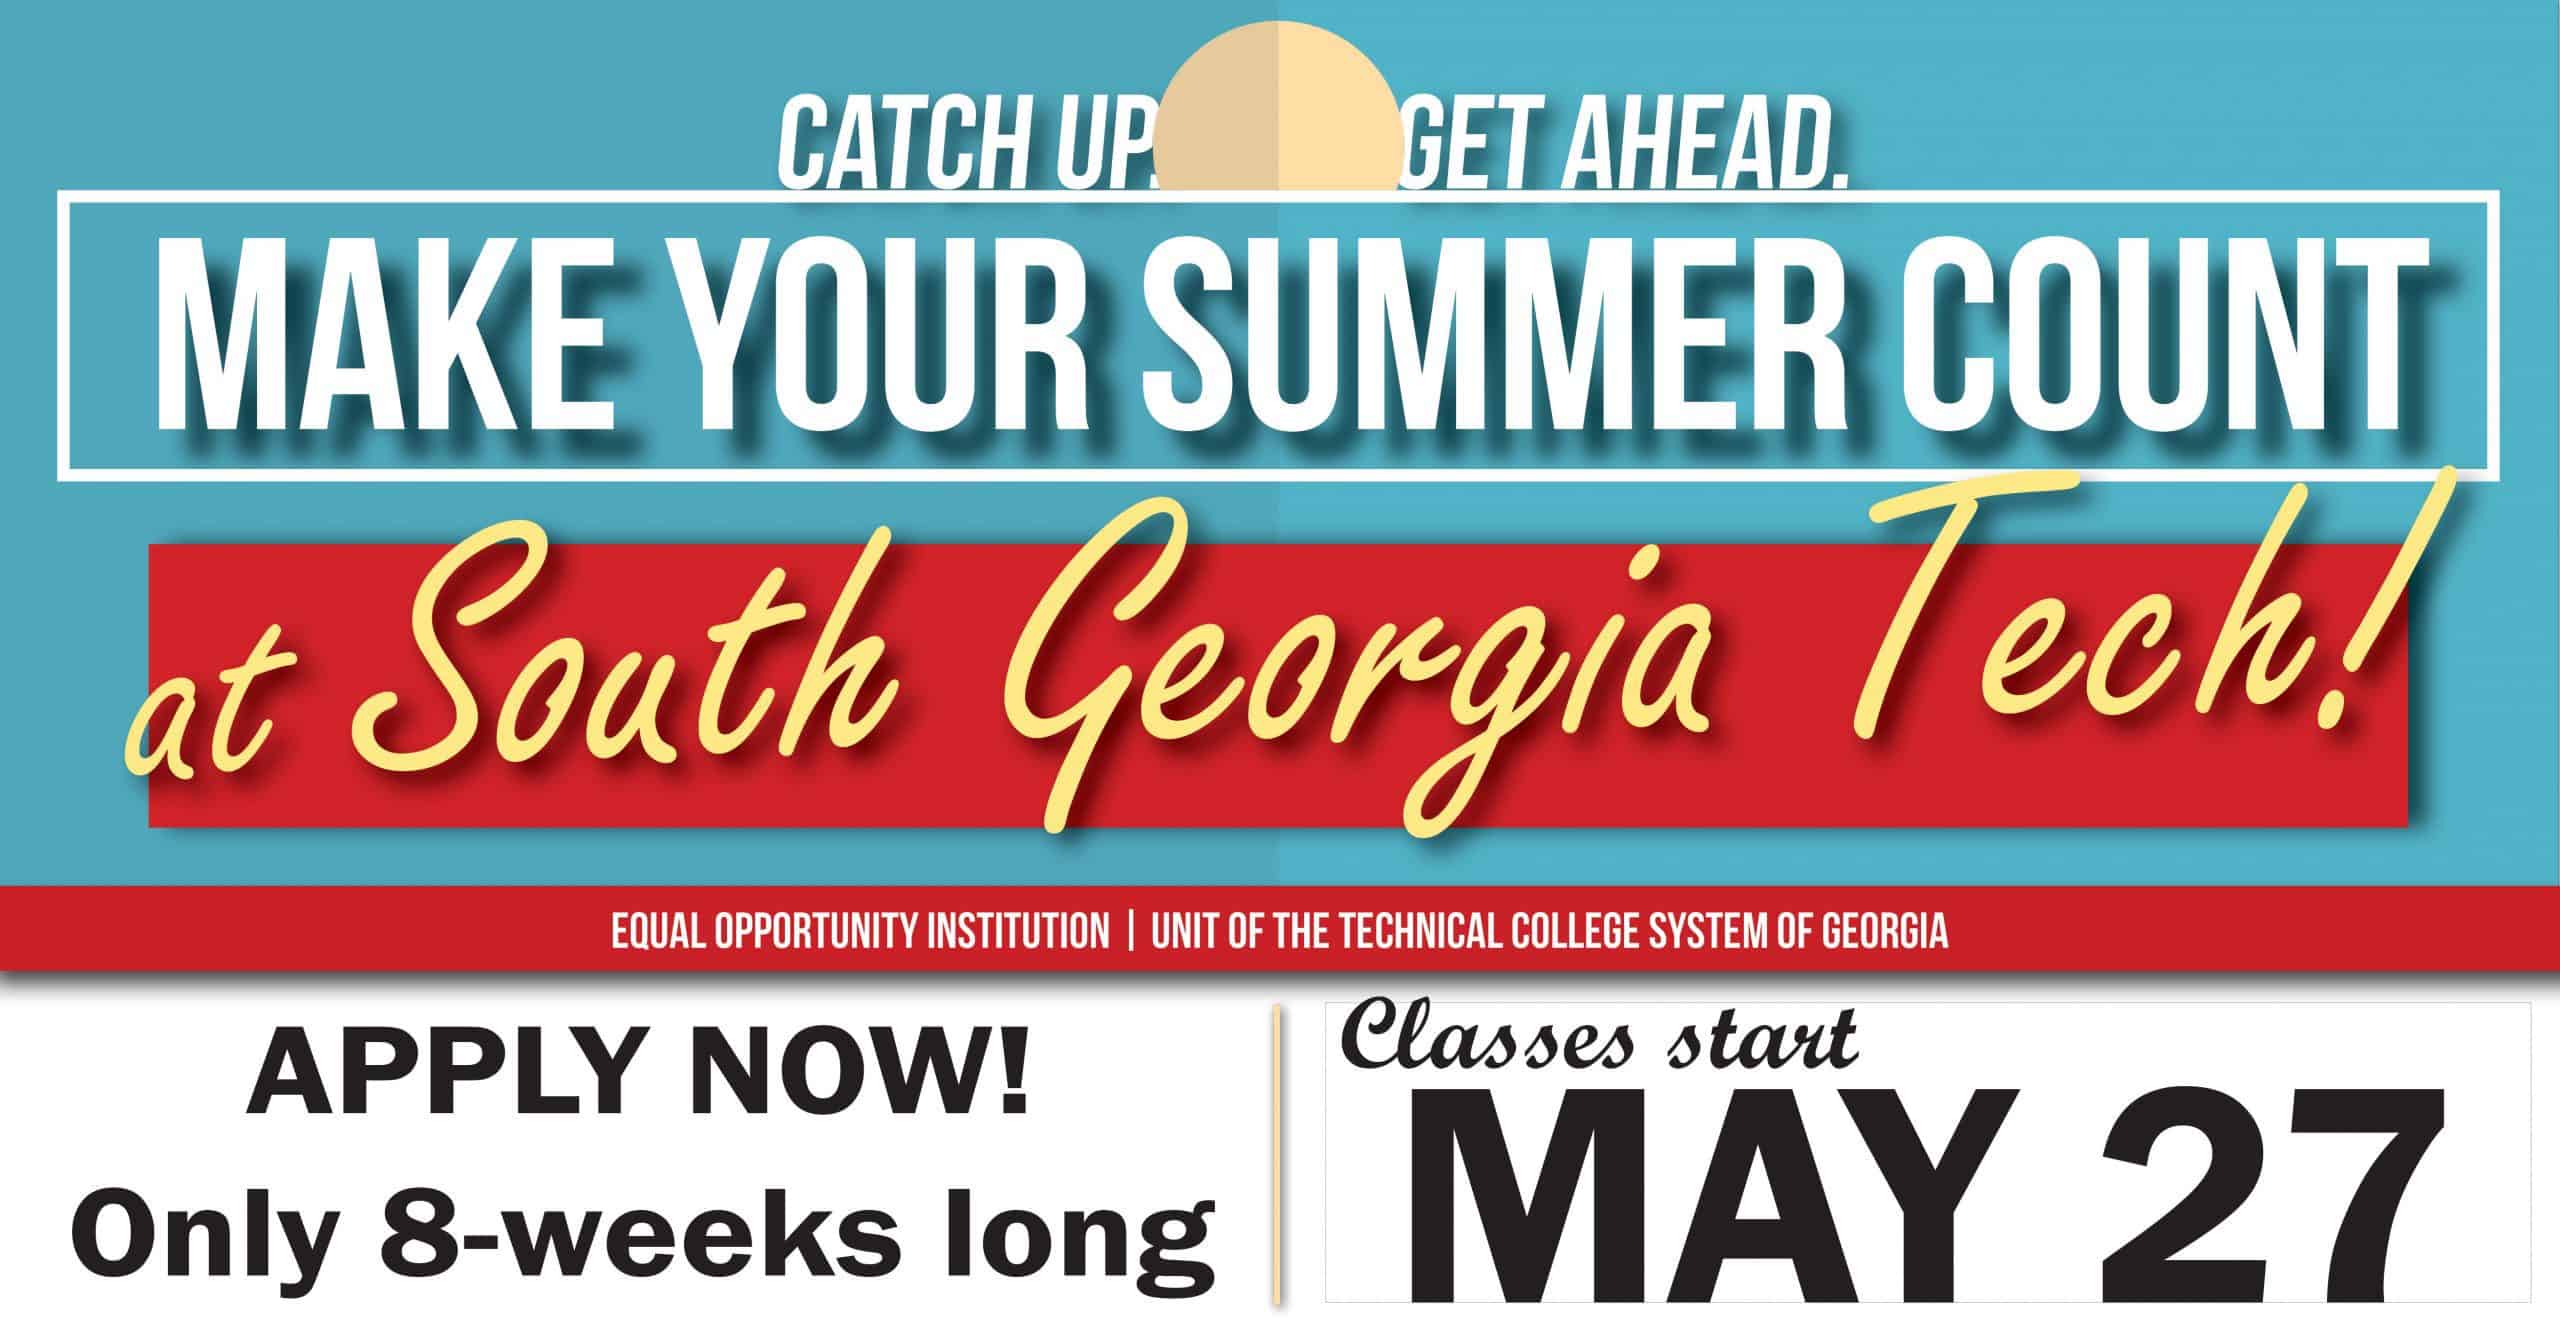 Make your summer count at South Georgia Technical College. Classes start May 27th and only last eight weeks. It is a great time to look at expanding or exploring new career options.